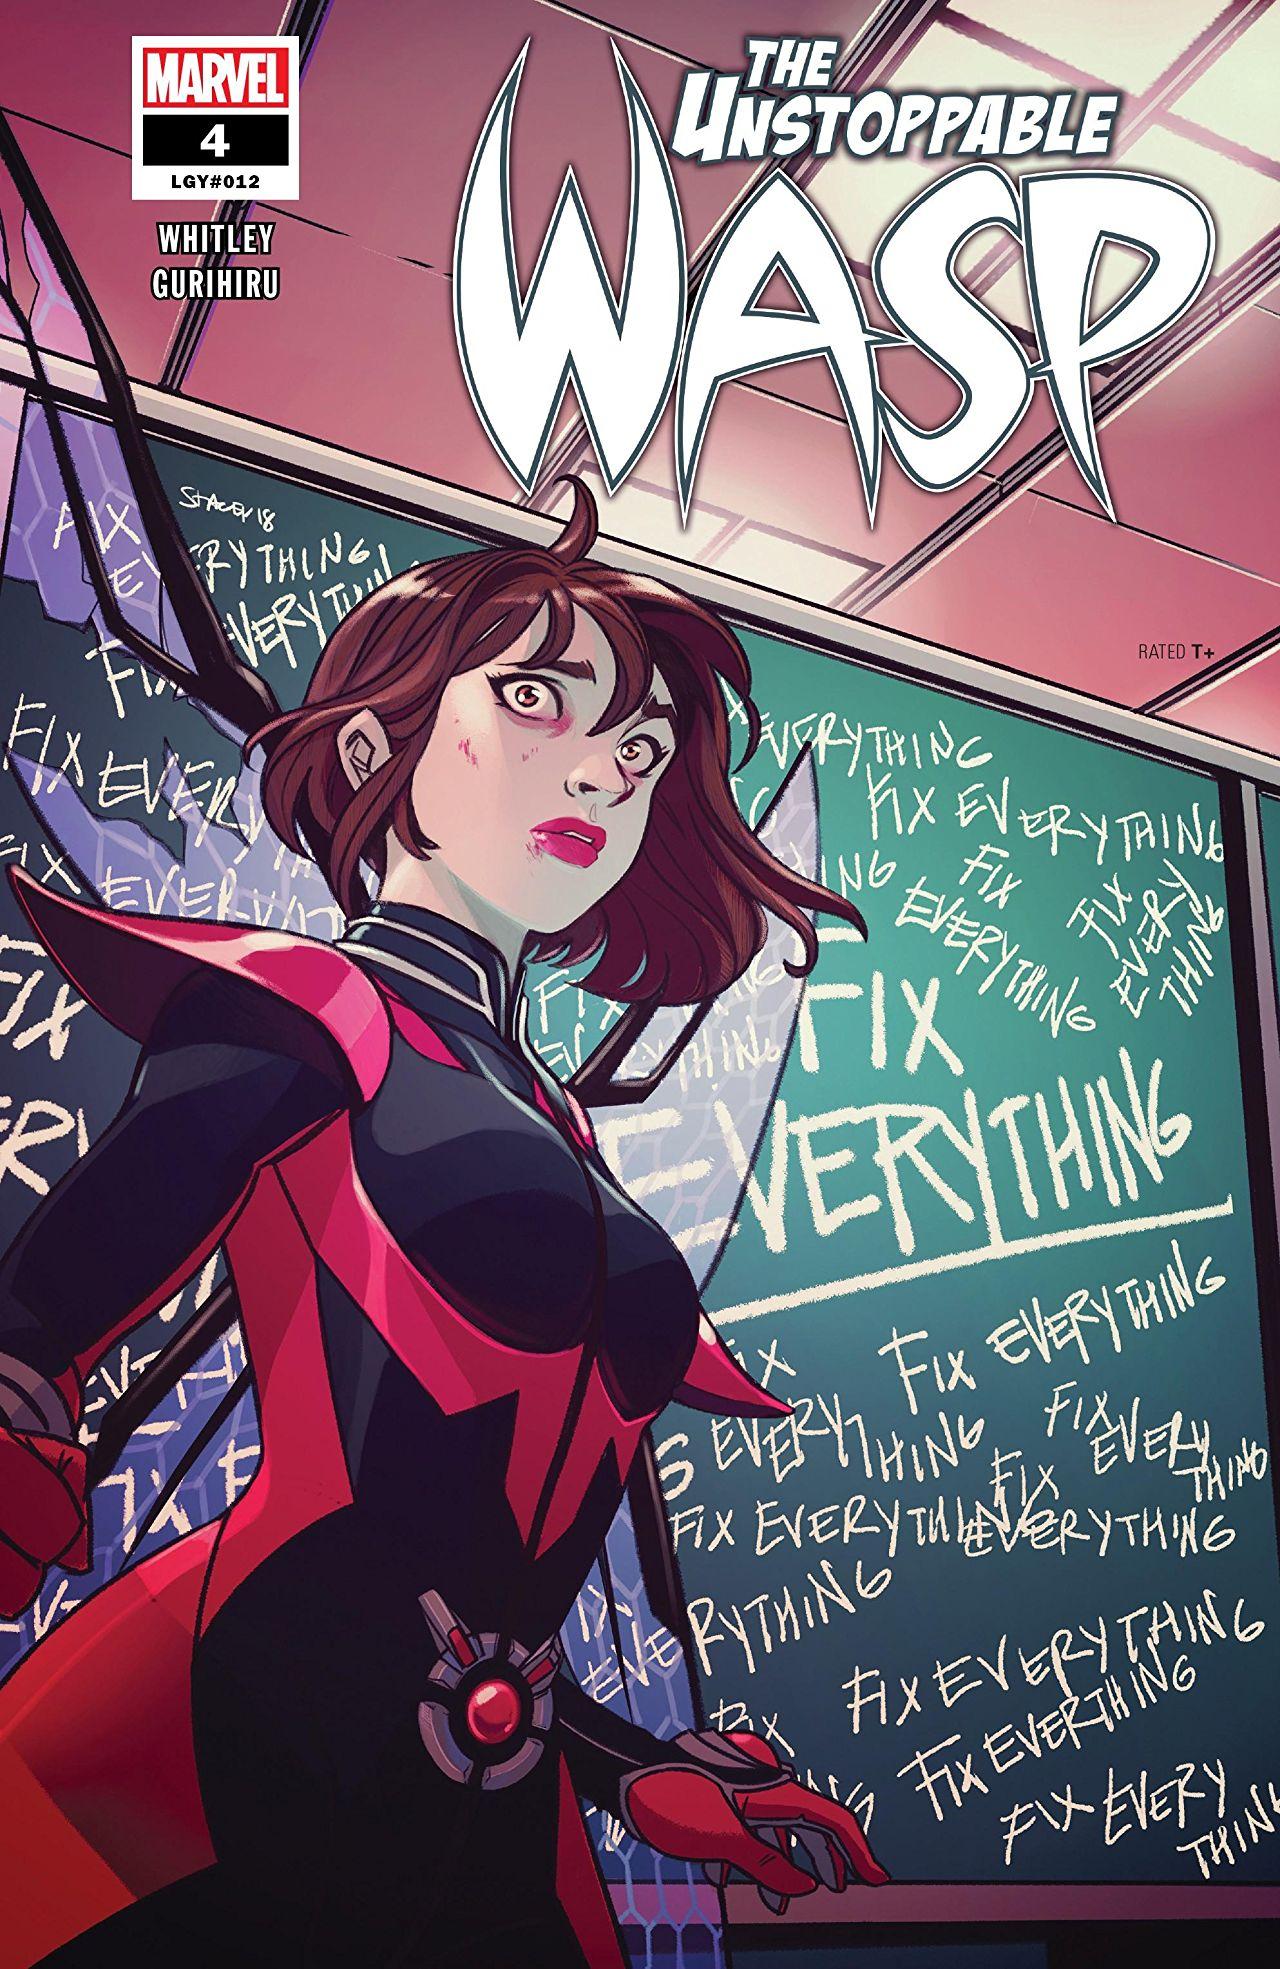 Unstoppable Wasp Vol. 2 #4